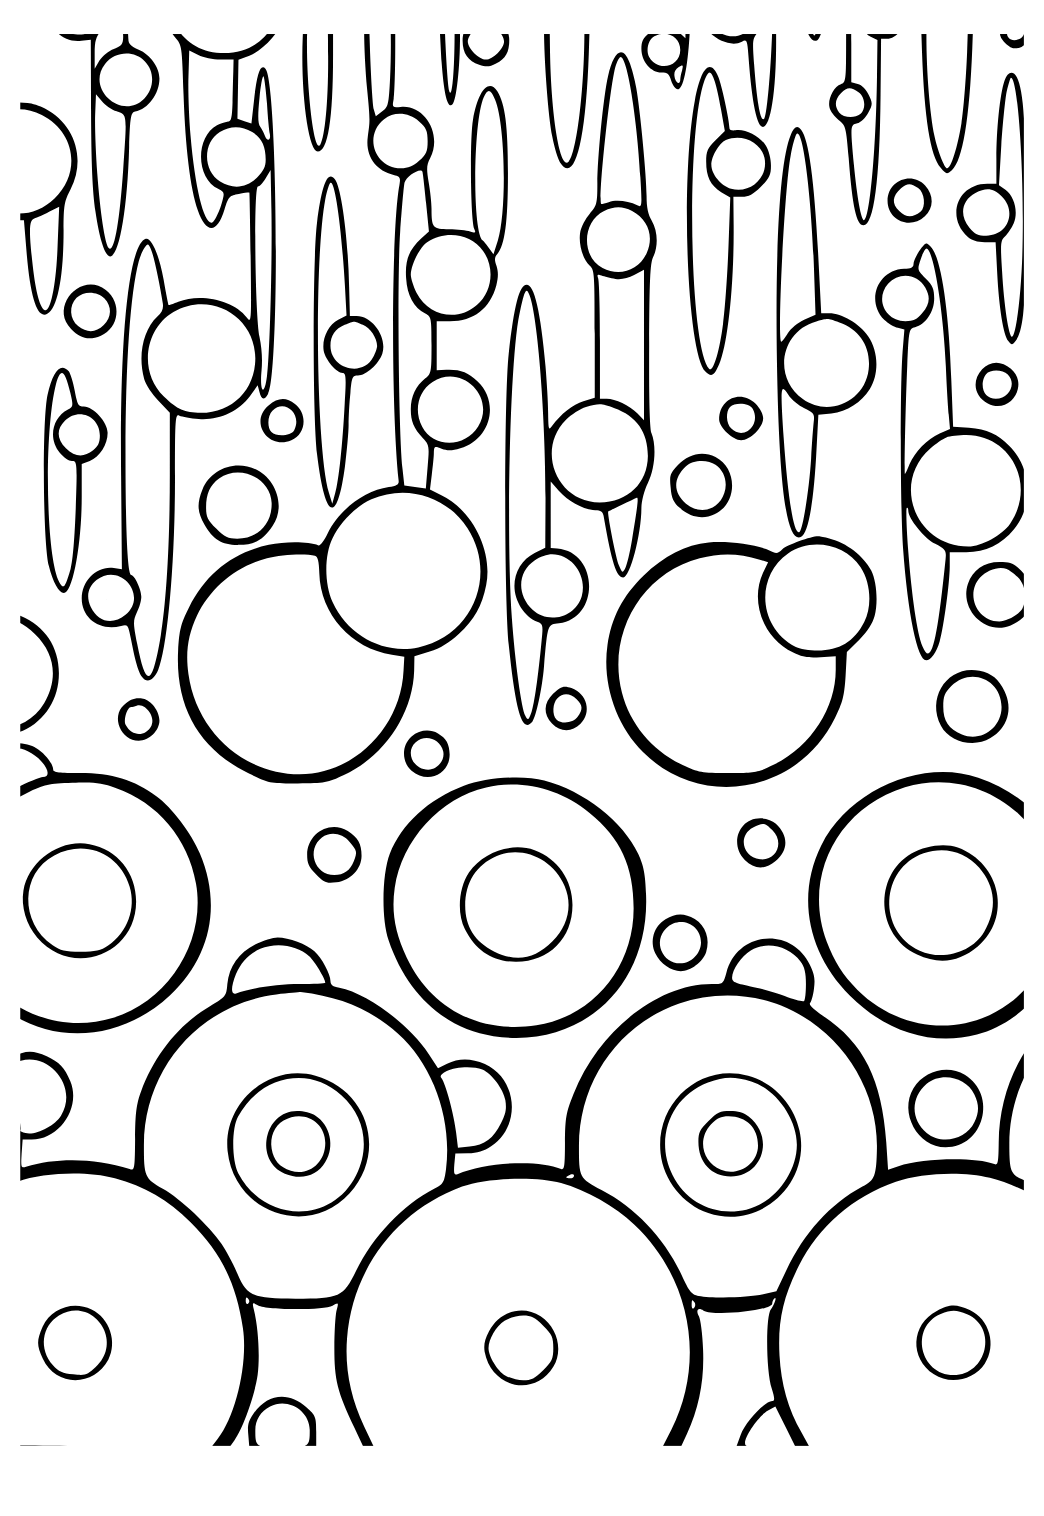 free-printable-circle-rain-coloring-page-for-adults-and-kids-lystok